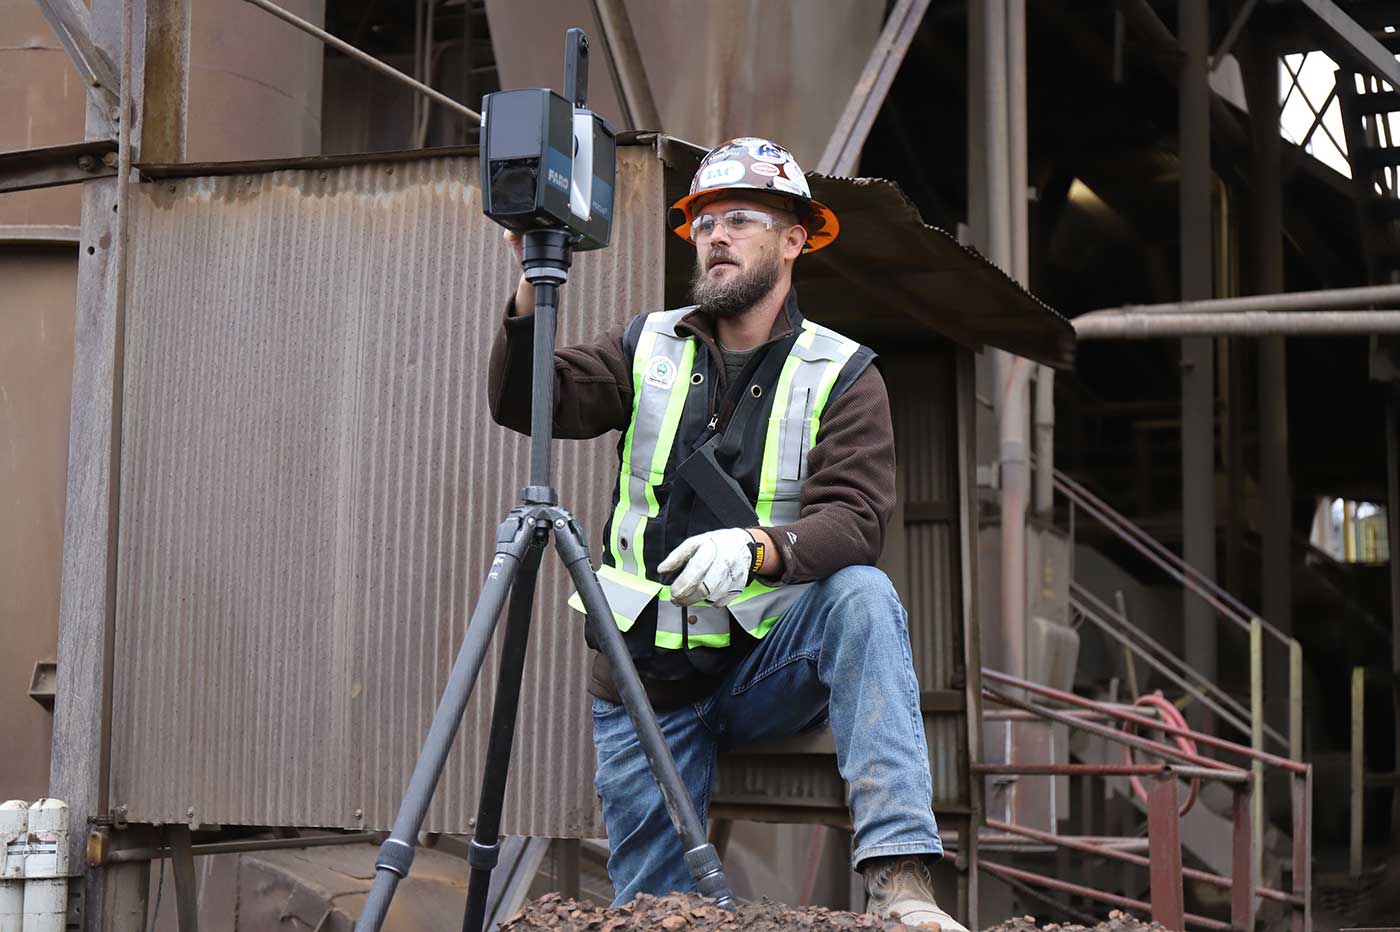 3D laser scanning camera being operated by a technician on a jobsite